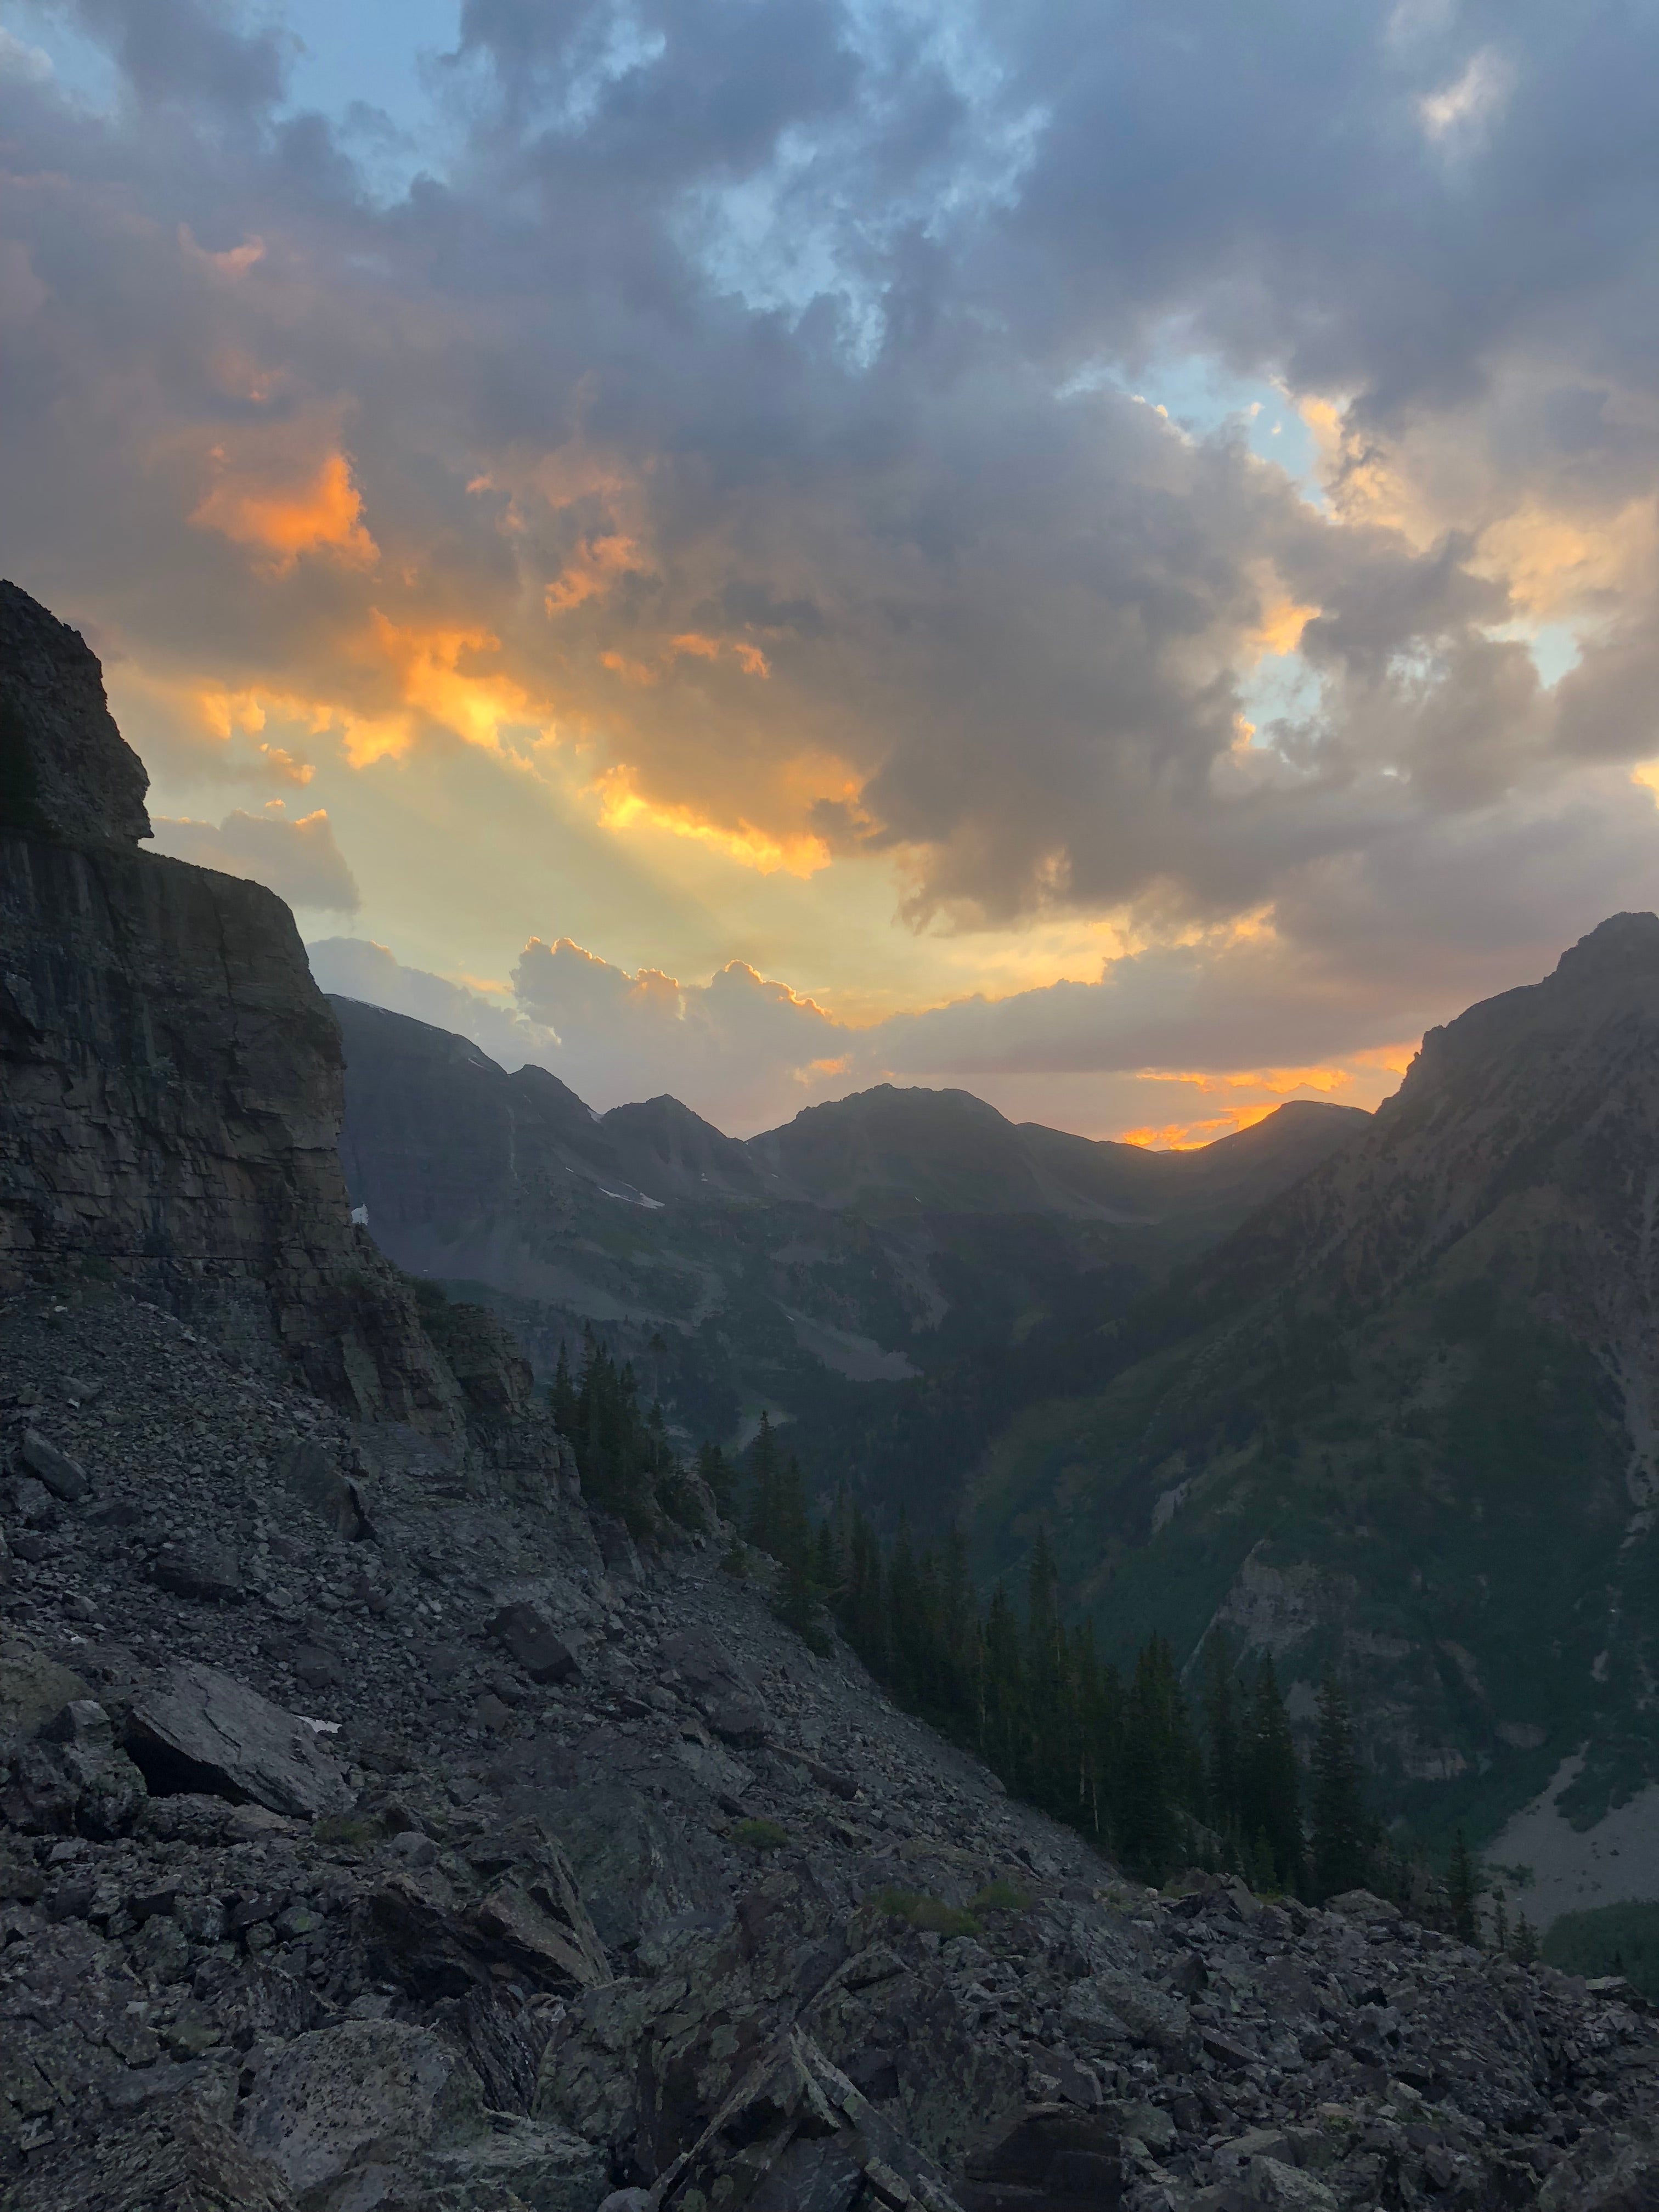 Camper submitted image from Maroon Bells - Snowmass Wilderness - Crater Lake Campground - 2